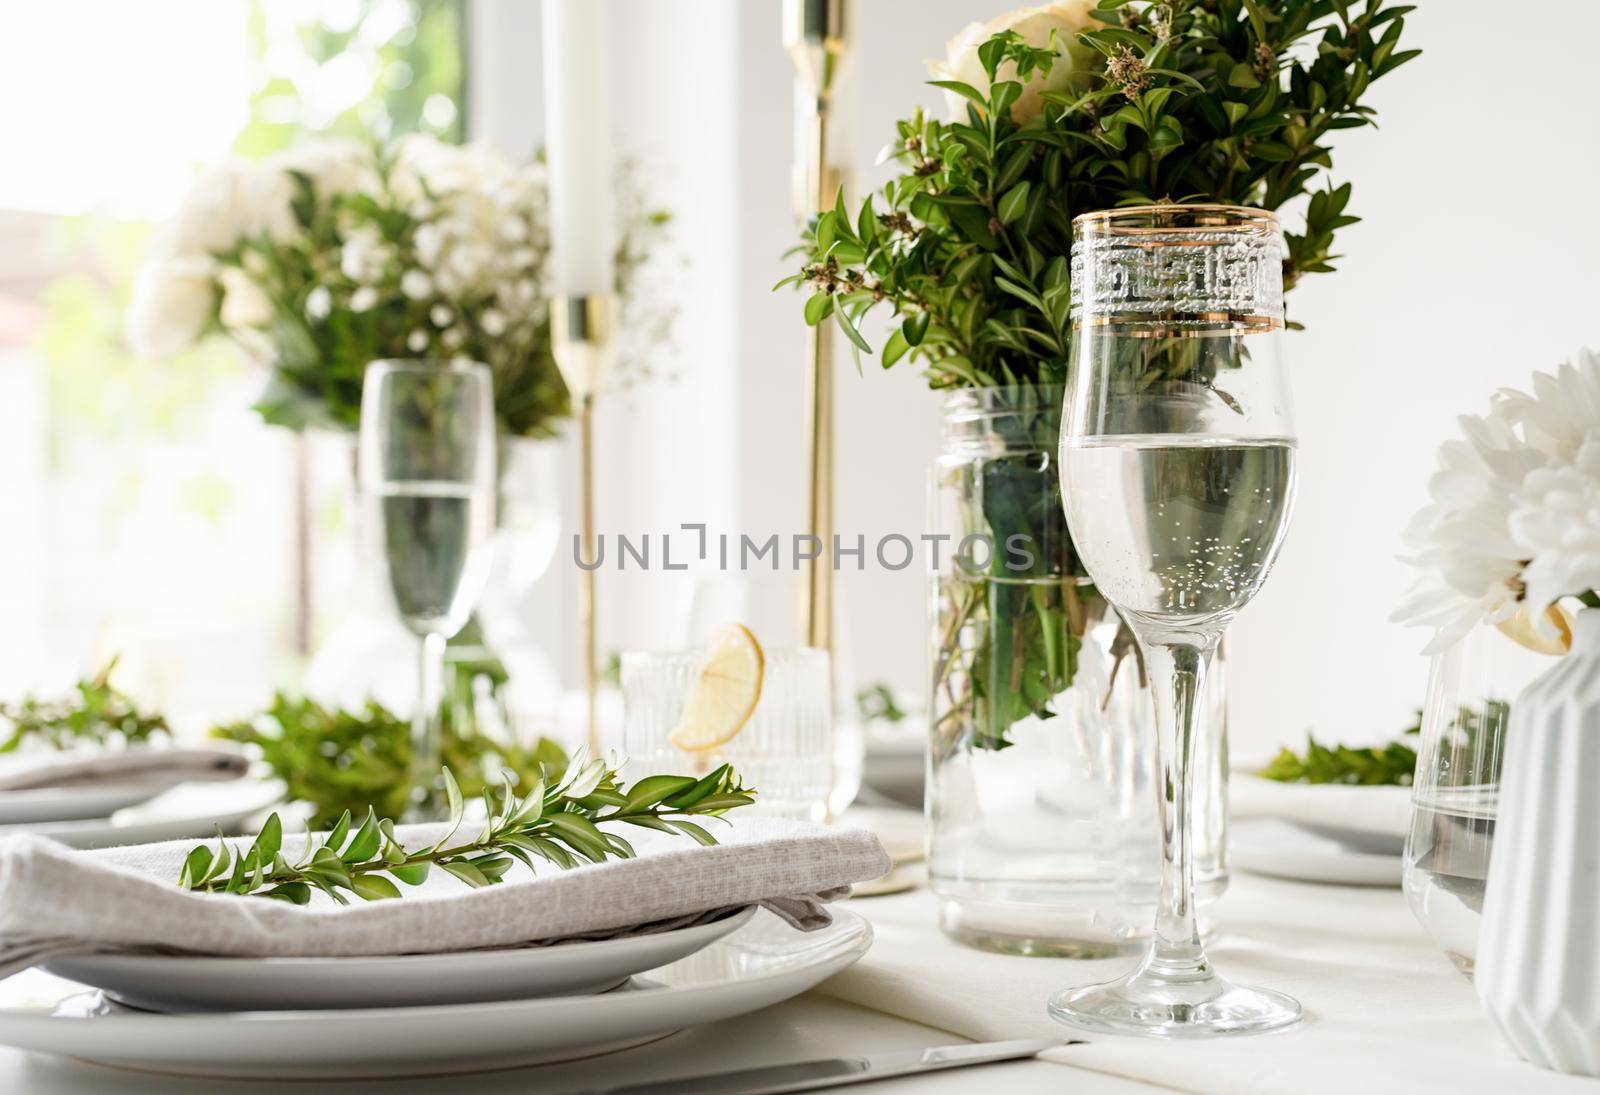 The wedding table setting with champagne flute . Wedding table decoration with white roses and boxwood by Desperada